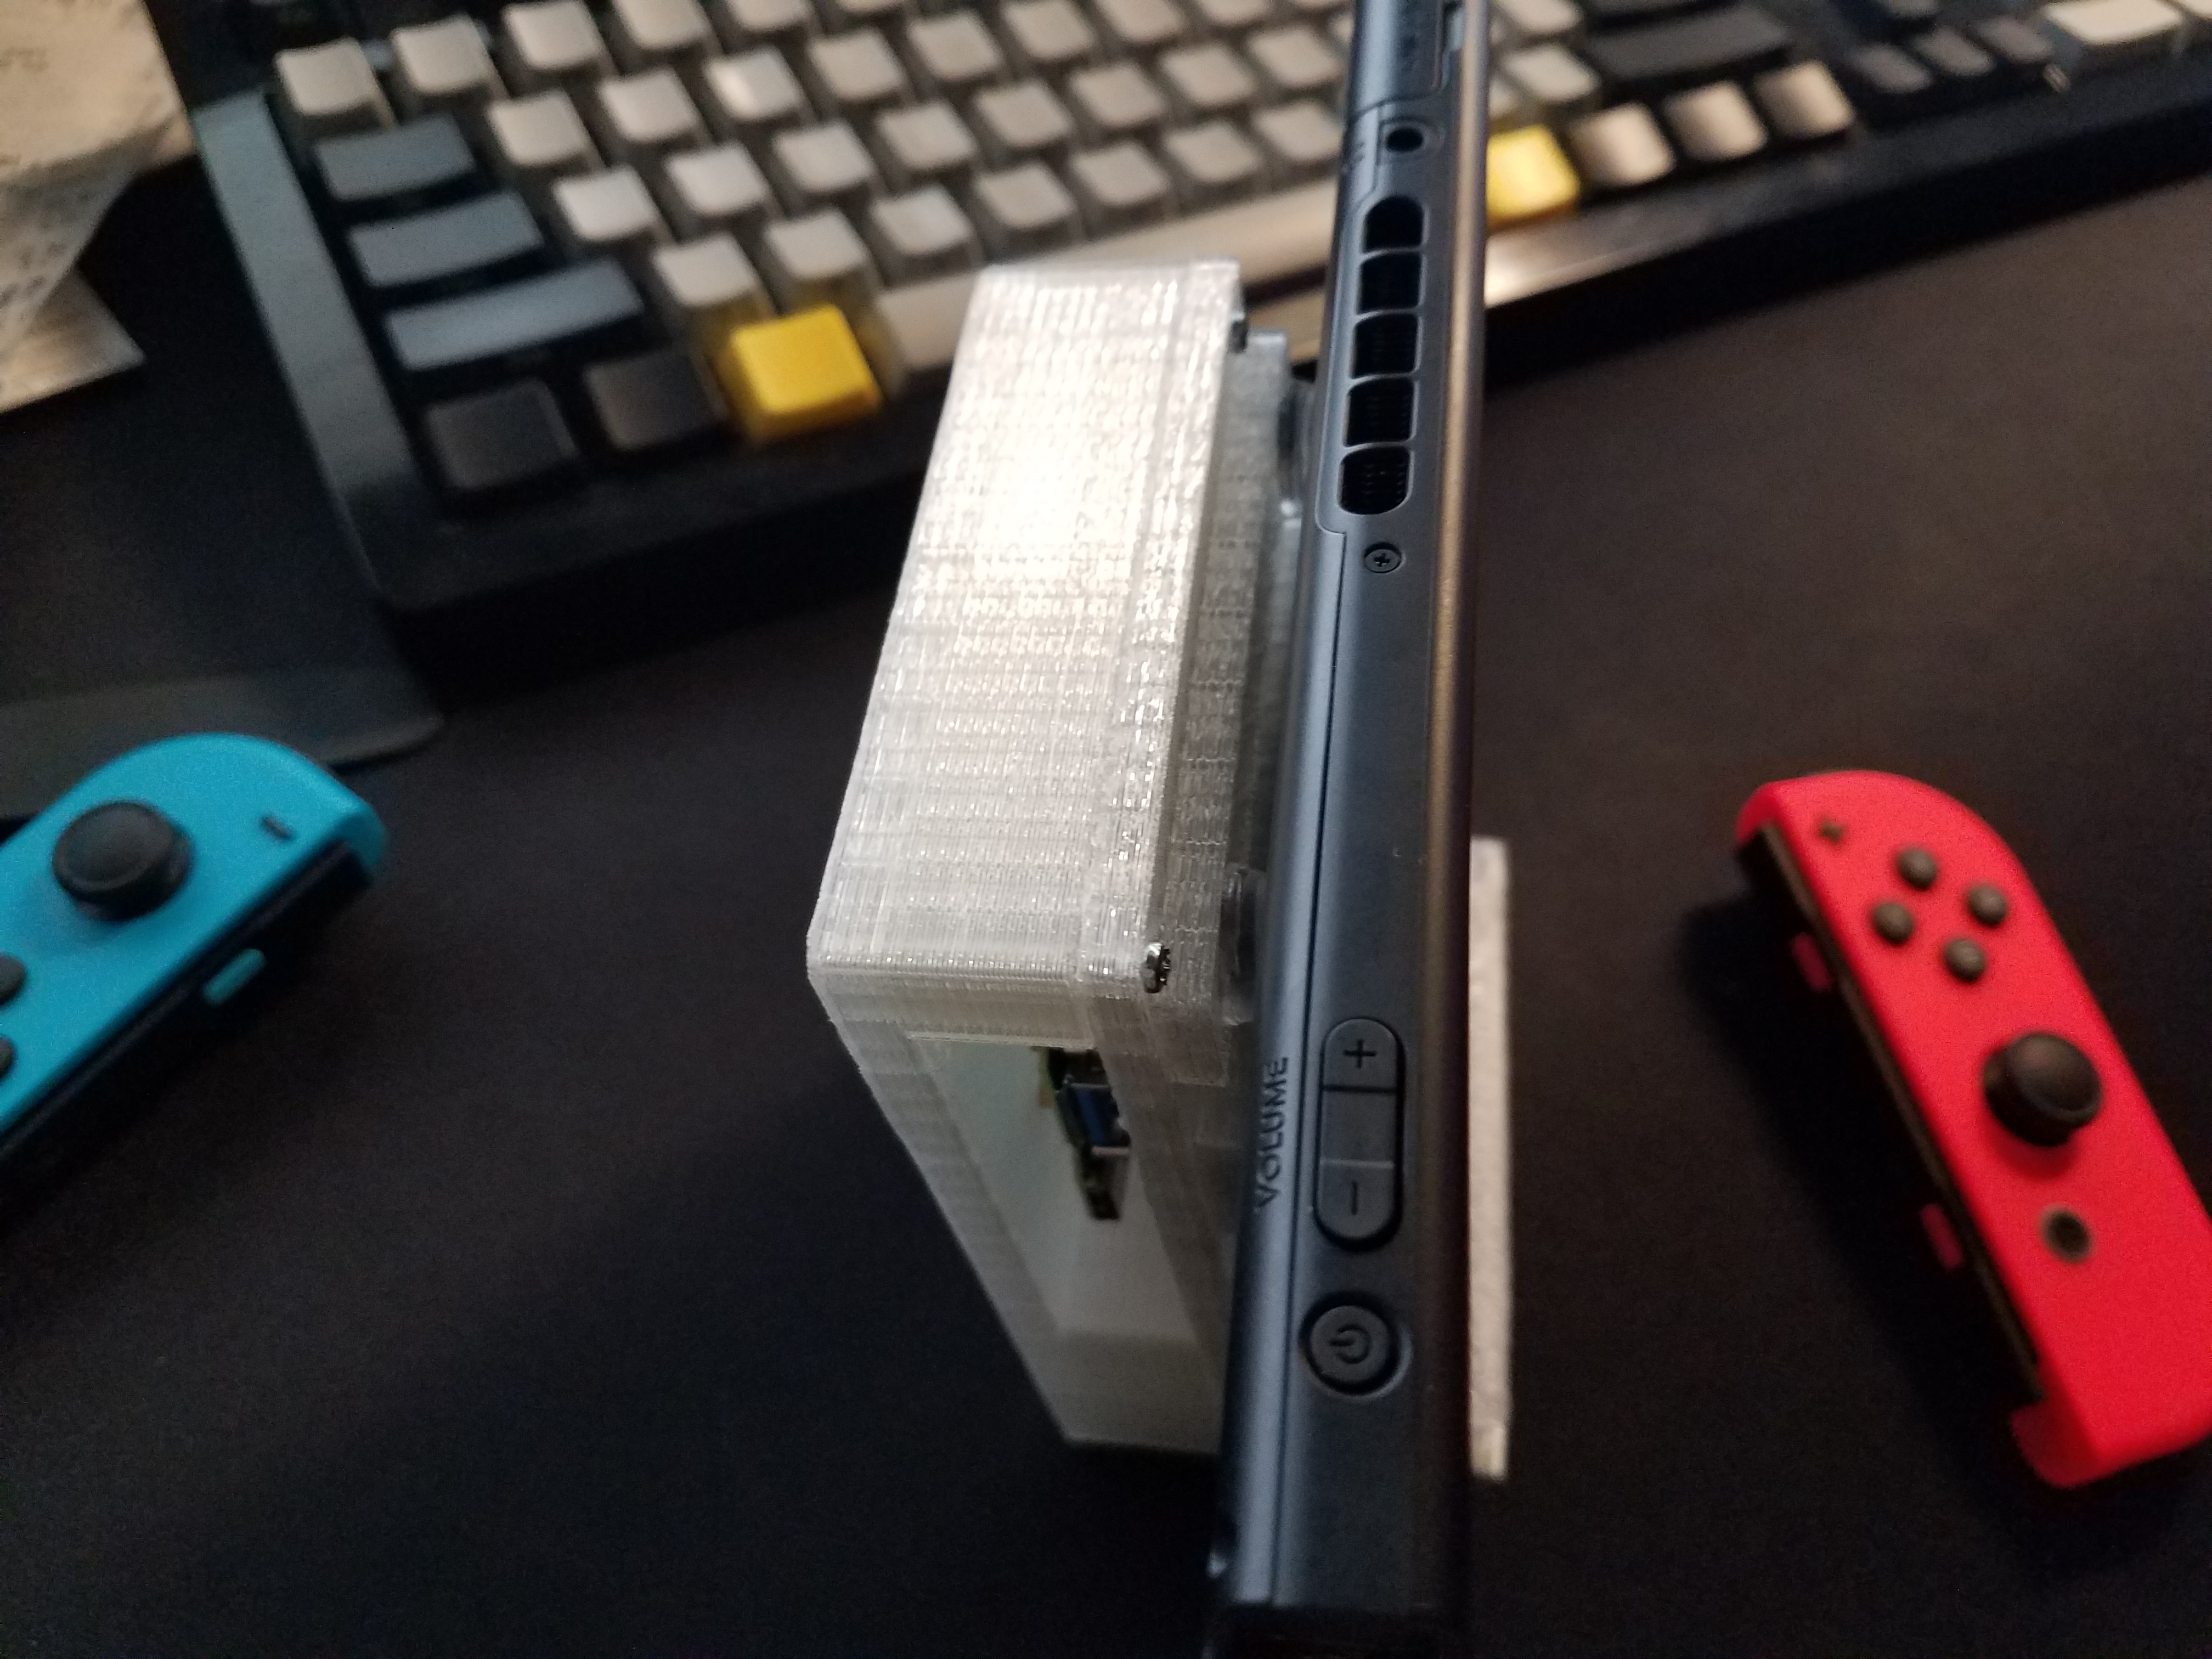 People are 3D printing their own Nintendo Switch docks - NintendoToday